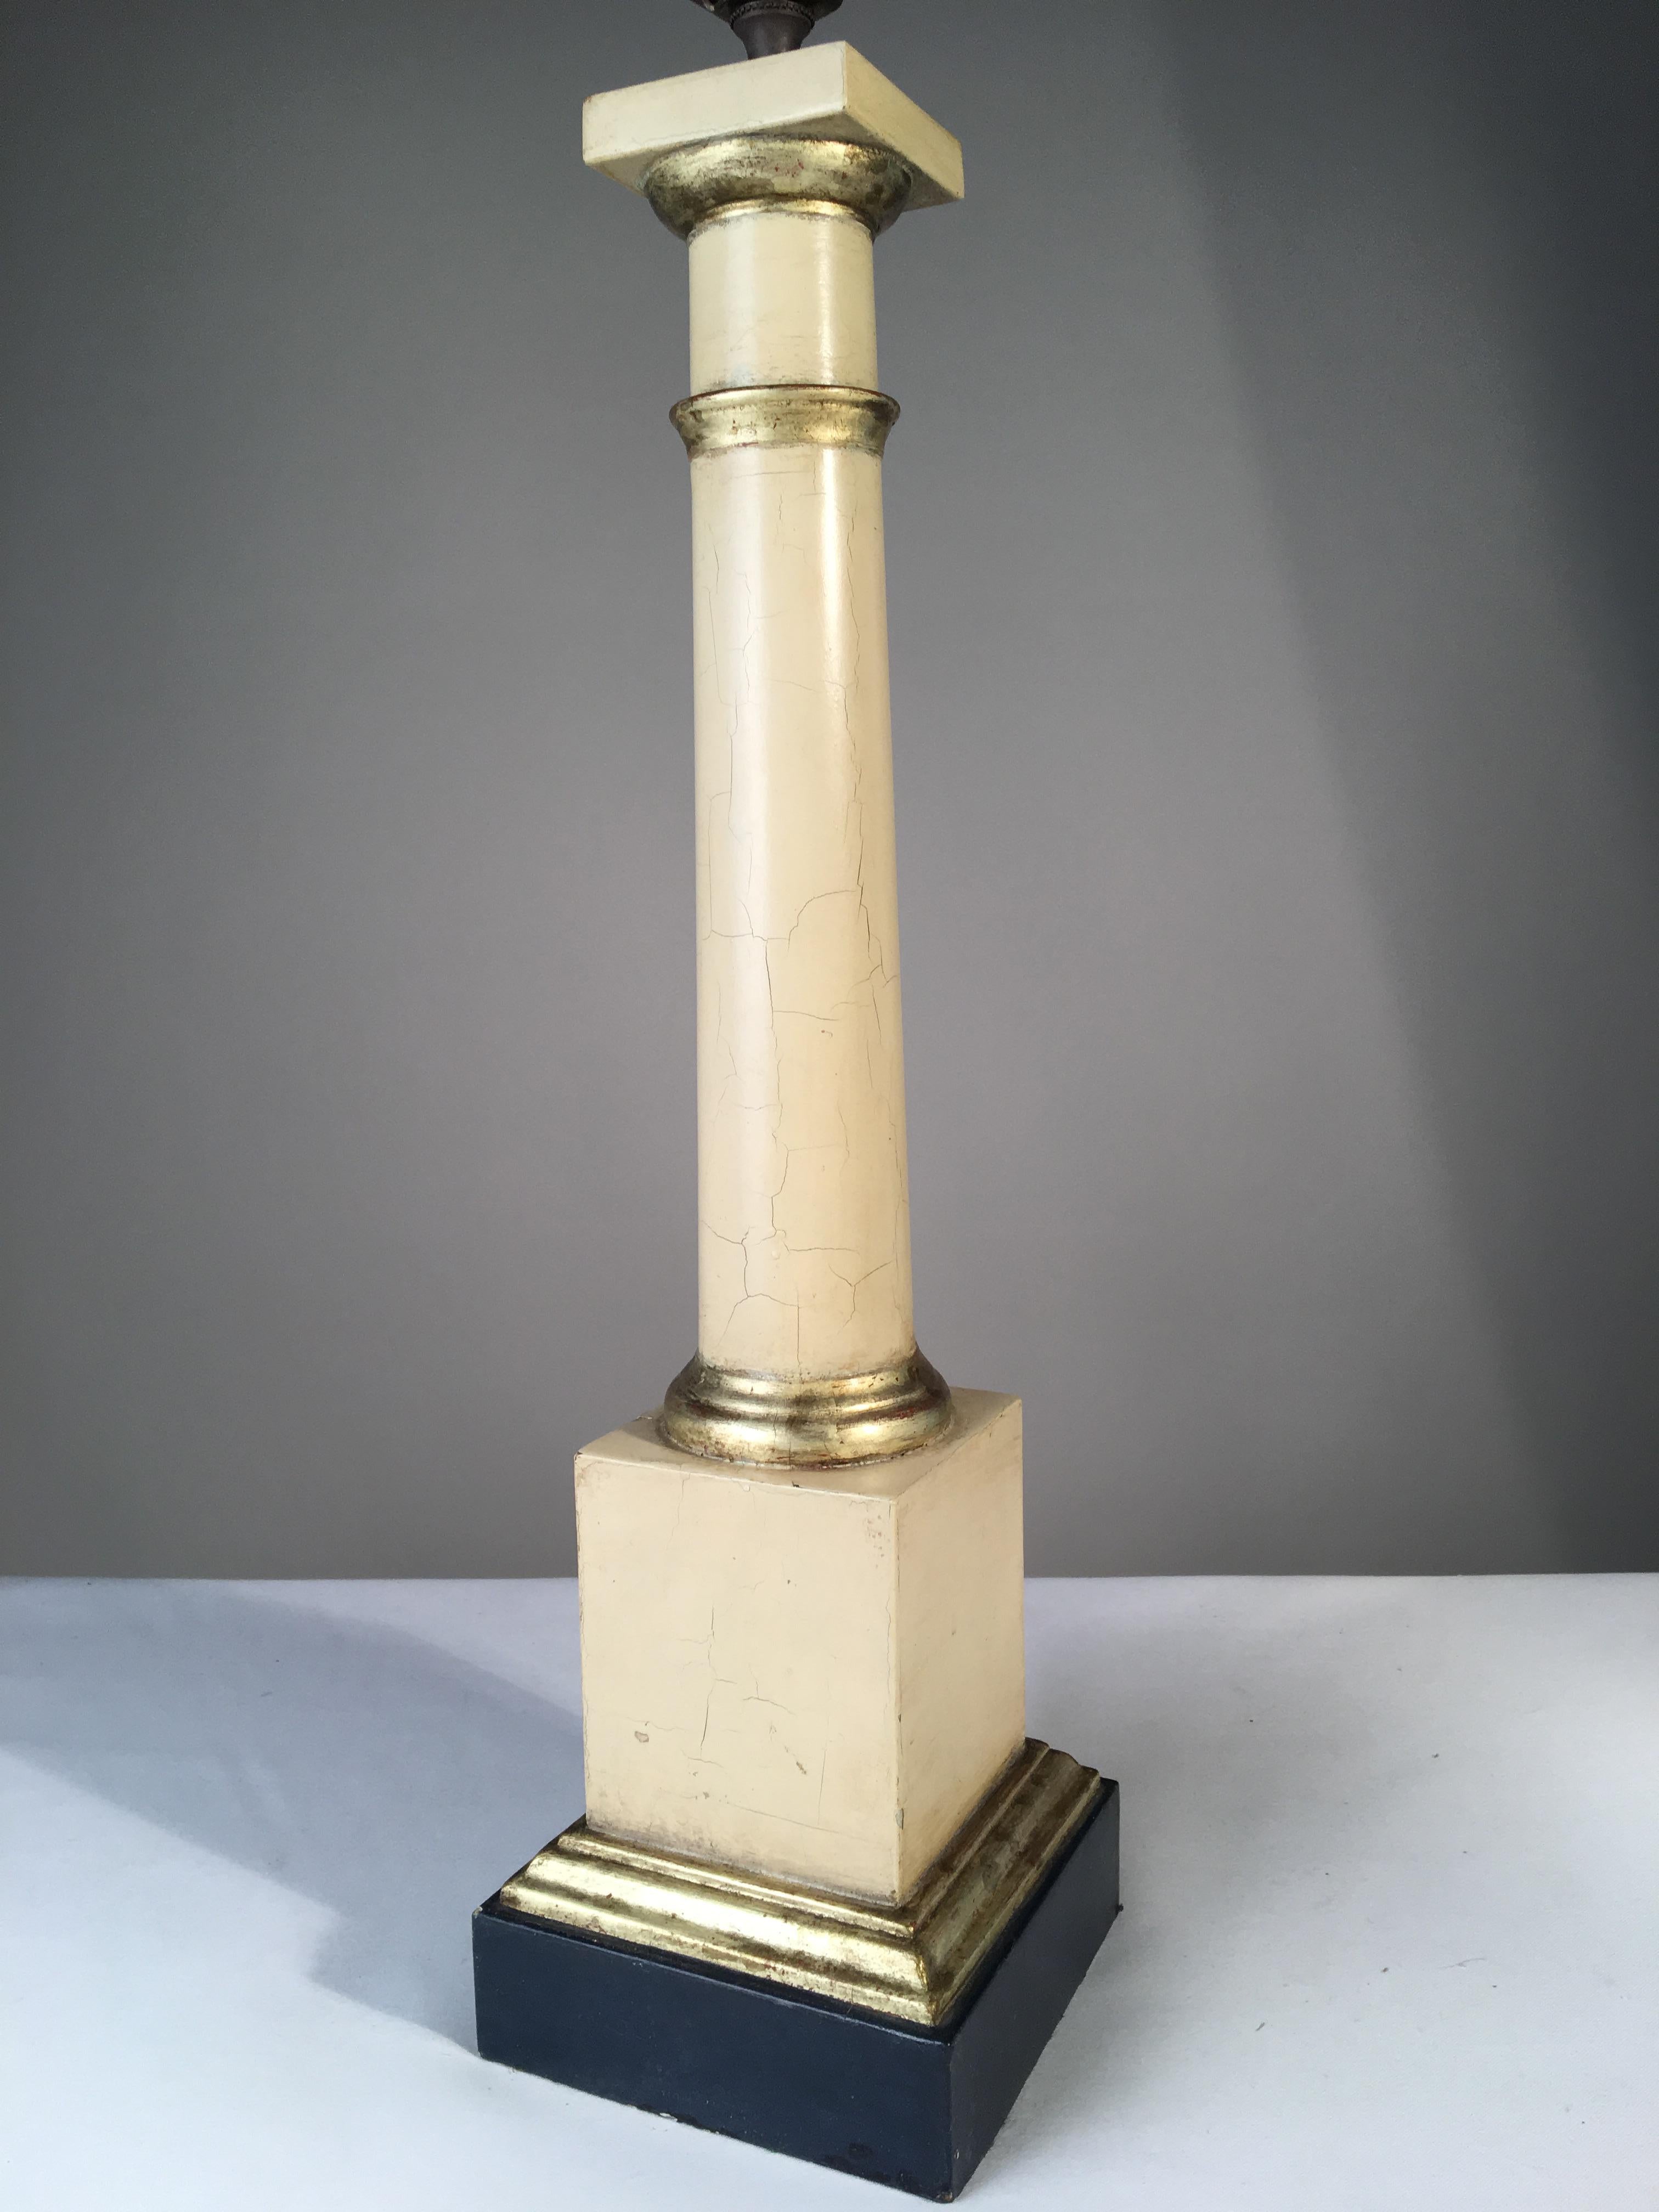 A tole column-form table lamp in the Empire style, cream paint and parcel gilt finish, with dark blue painted base, mid-20th century.